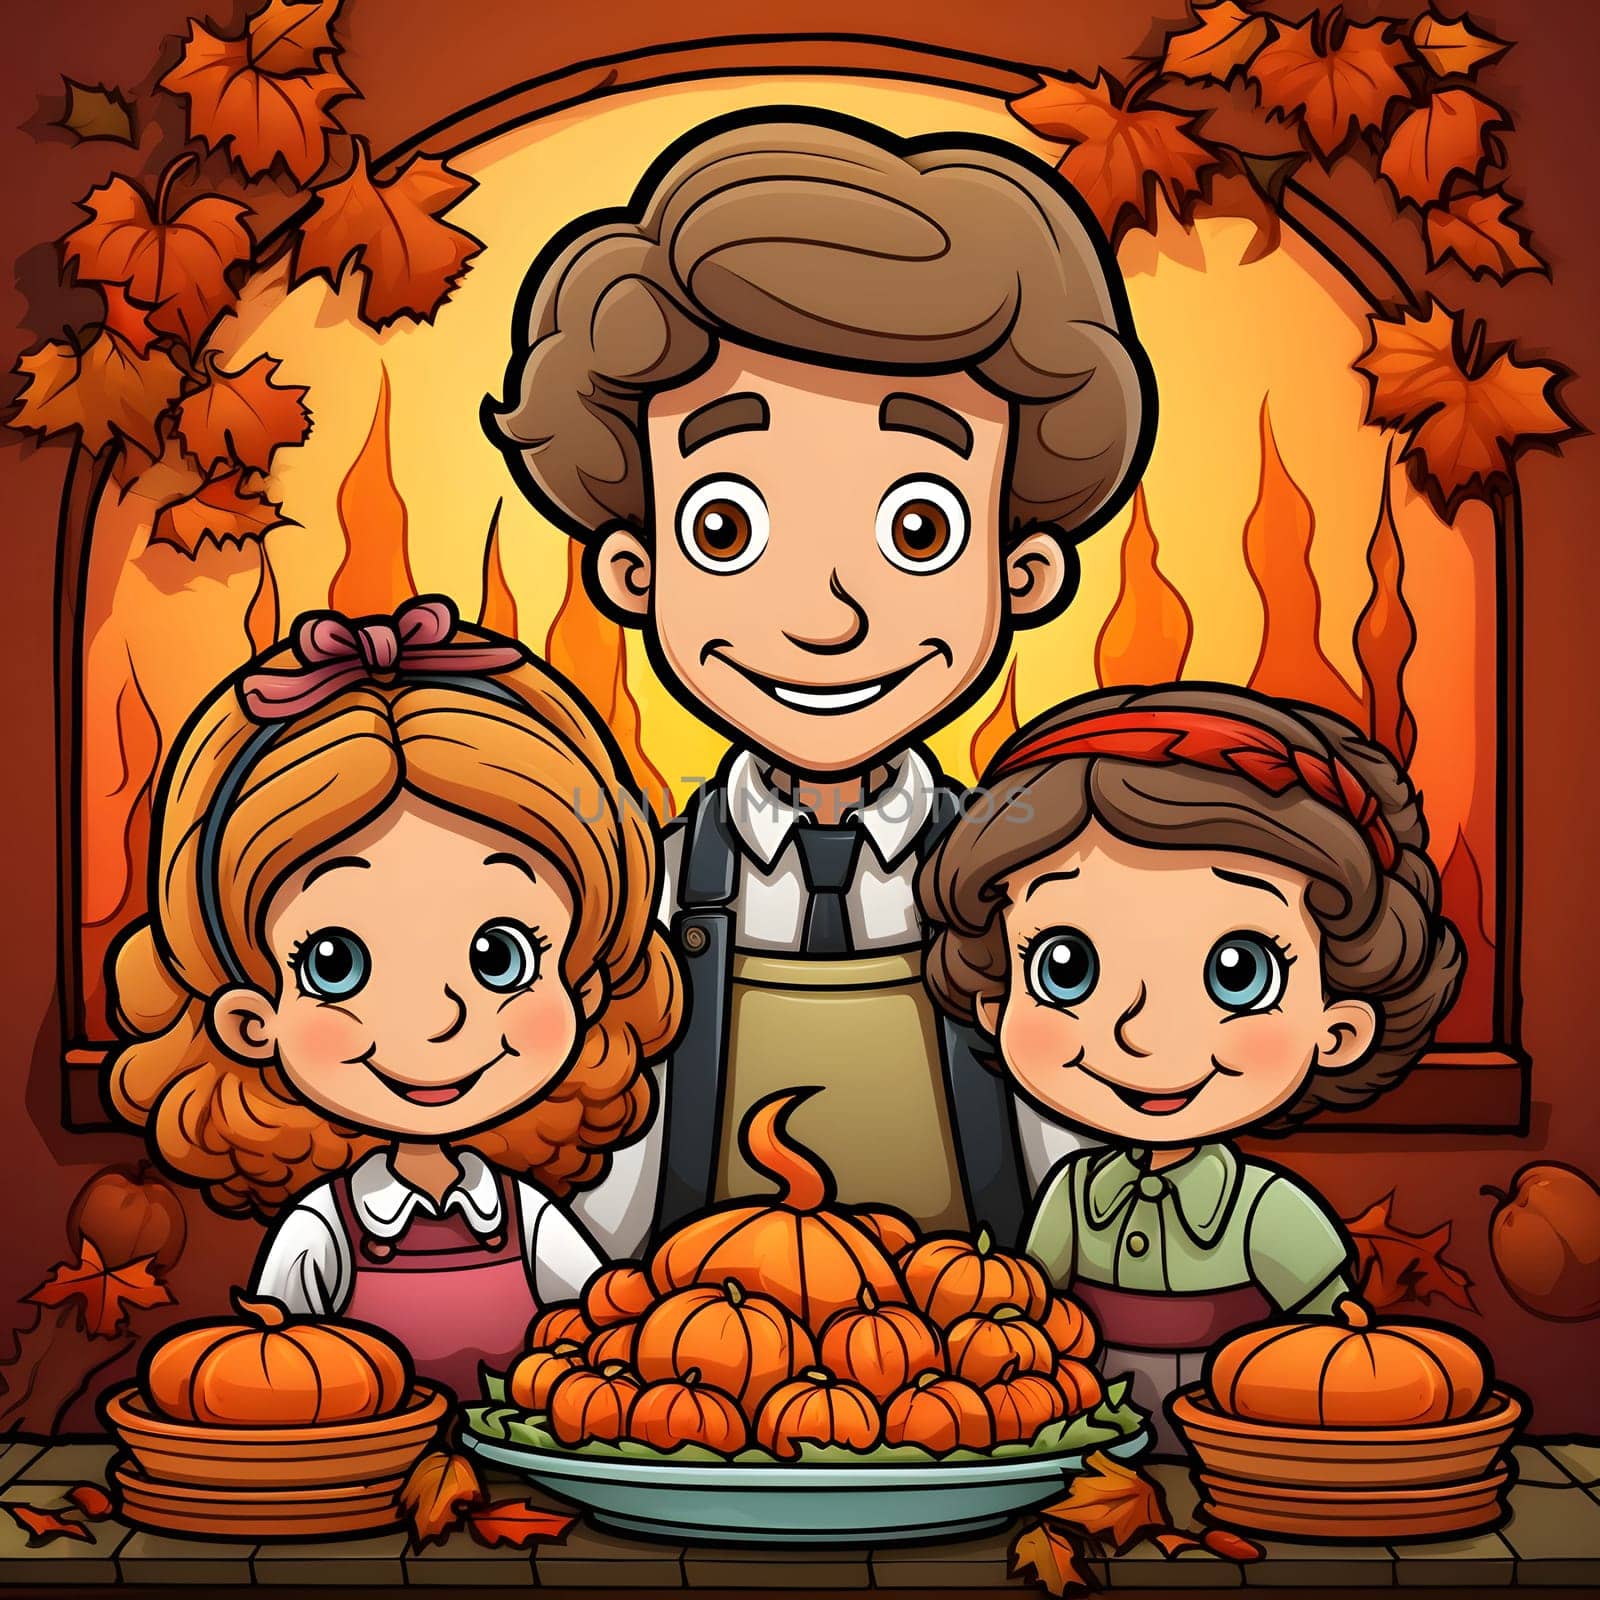 Illustration of a smiling family at a table with pumpkins in the back of the fireplace and leaves. Pumpkin as a dish of thanksgiving for the harvest. An atmosphere of joy and celebration.